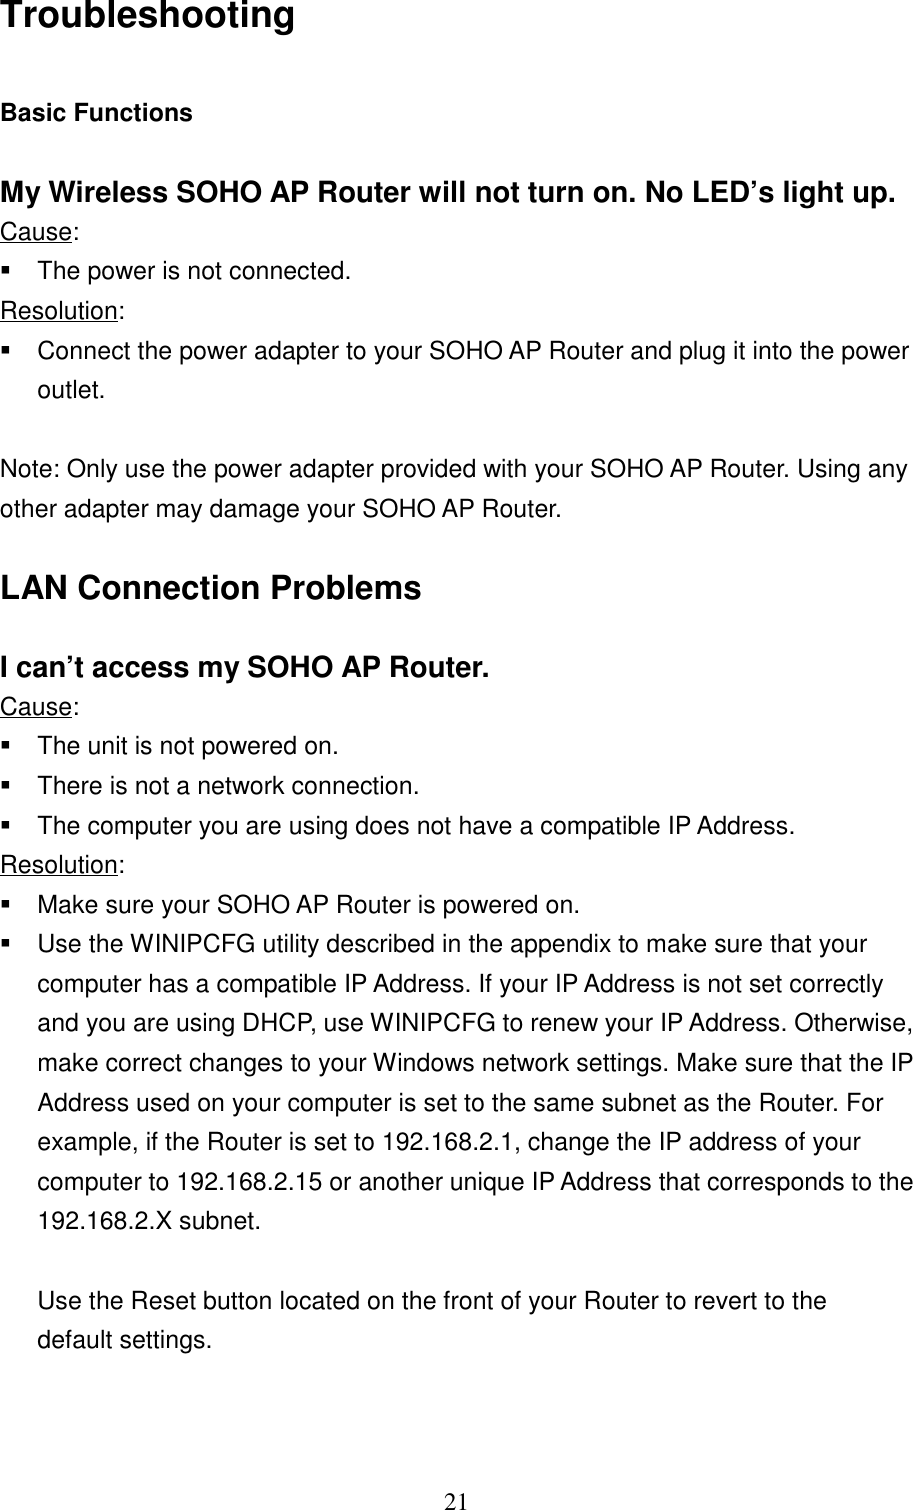 21TroubleshootingBasic FunctionsMy Wireless SOHO AP Router will not turn on. No LED’s light up.Cause:  The power is not connected.Resolution:  Connect the power adapter to your SOHO AP Router and plug it into the poweroutlet.Note: Only use the power adapter provided with your SOHO AP Router. Using anyother adapter may damage your SOHO AP Router.LAN Connection ProblemsI can’t access my SOHO AP Router.Cause:  The unit is not powered on.  There is not a network connection.  The computer you are using does not have a compatible IP Address.Resolution:  Make sure your SOHO AP Router is powered on.  Use the WINIPCFG utility described in the appendix to make sure that yourcomputer has a compatible IP Address. If your IP Address is not set correctlyand you are using DHCP, use WINIPCFG to renew your IP Address. Otherwise,make correct changes to your Windows network settings. Make sure that the IPAddress used on your computer is set to the same subnet as the Router. Forexample, if the Router is set to 192.168.2.1, change the IP address of yourcomputer to 192.168.2.15 or another unique IP Address that corresponds to the192.168.2.X subnet.      Use the Reset button located on the front of your Router to revert to the   default settings.